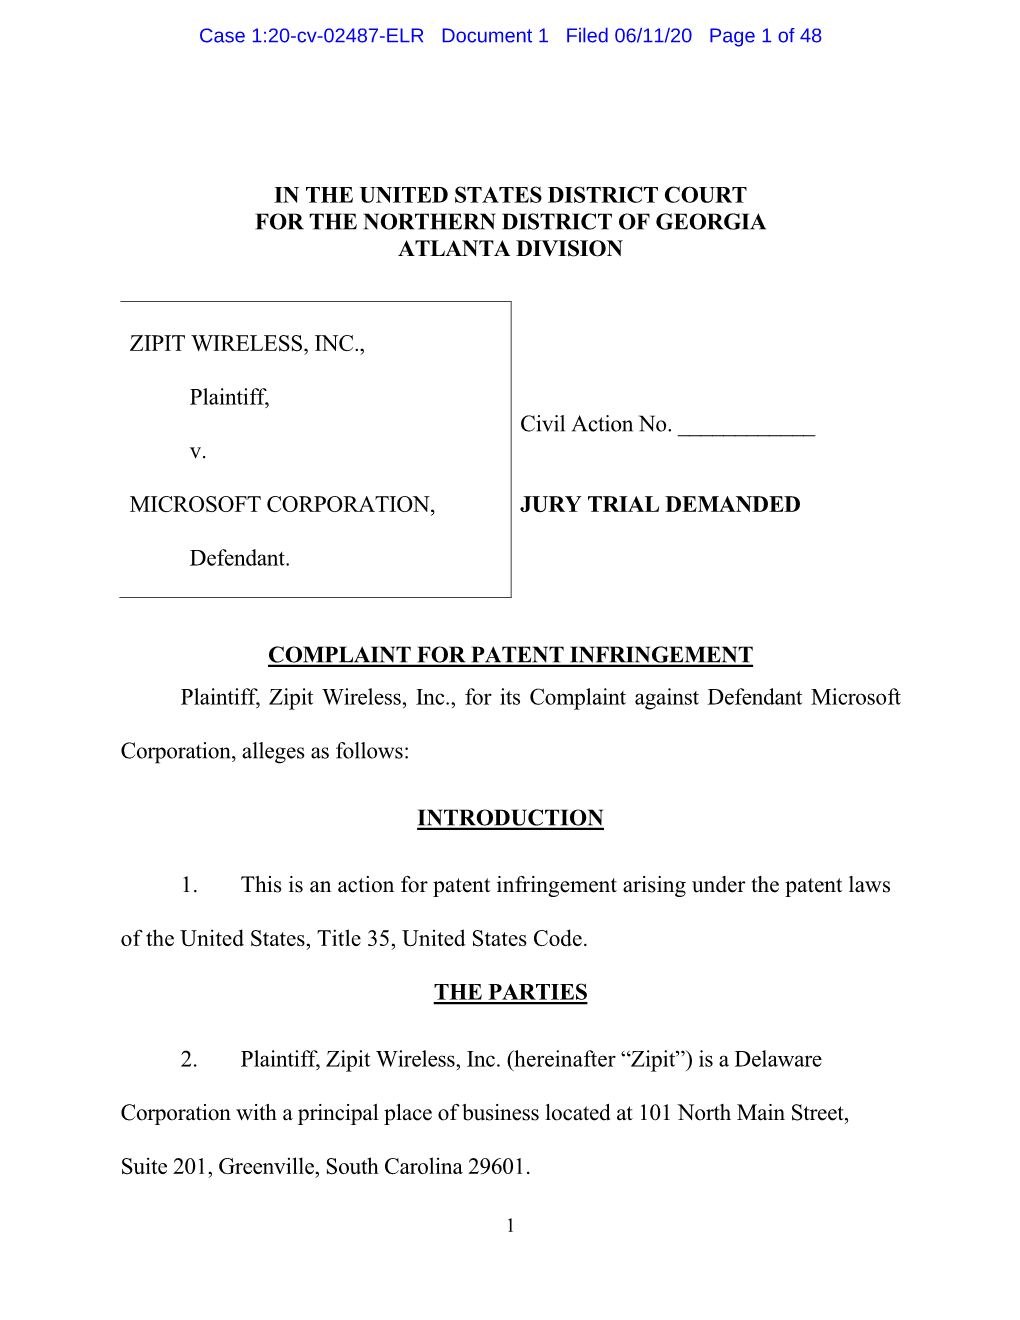 IN the UNITED STATES DISTRICT COURT for the NORTHERN DISTRICT of GEORGIA ATLANTA DIVISION ZIPIT WIRELESS, INC., Plaintiff, V. MI